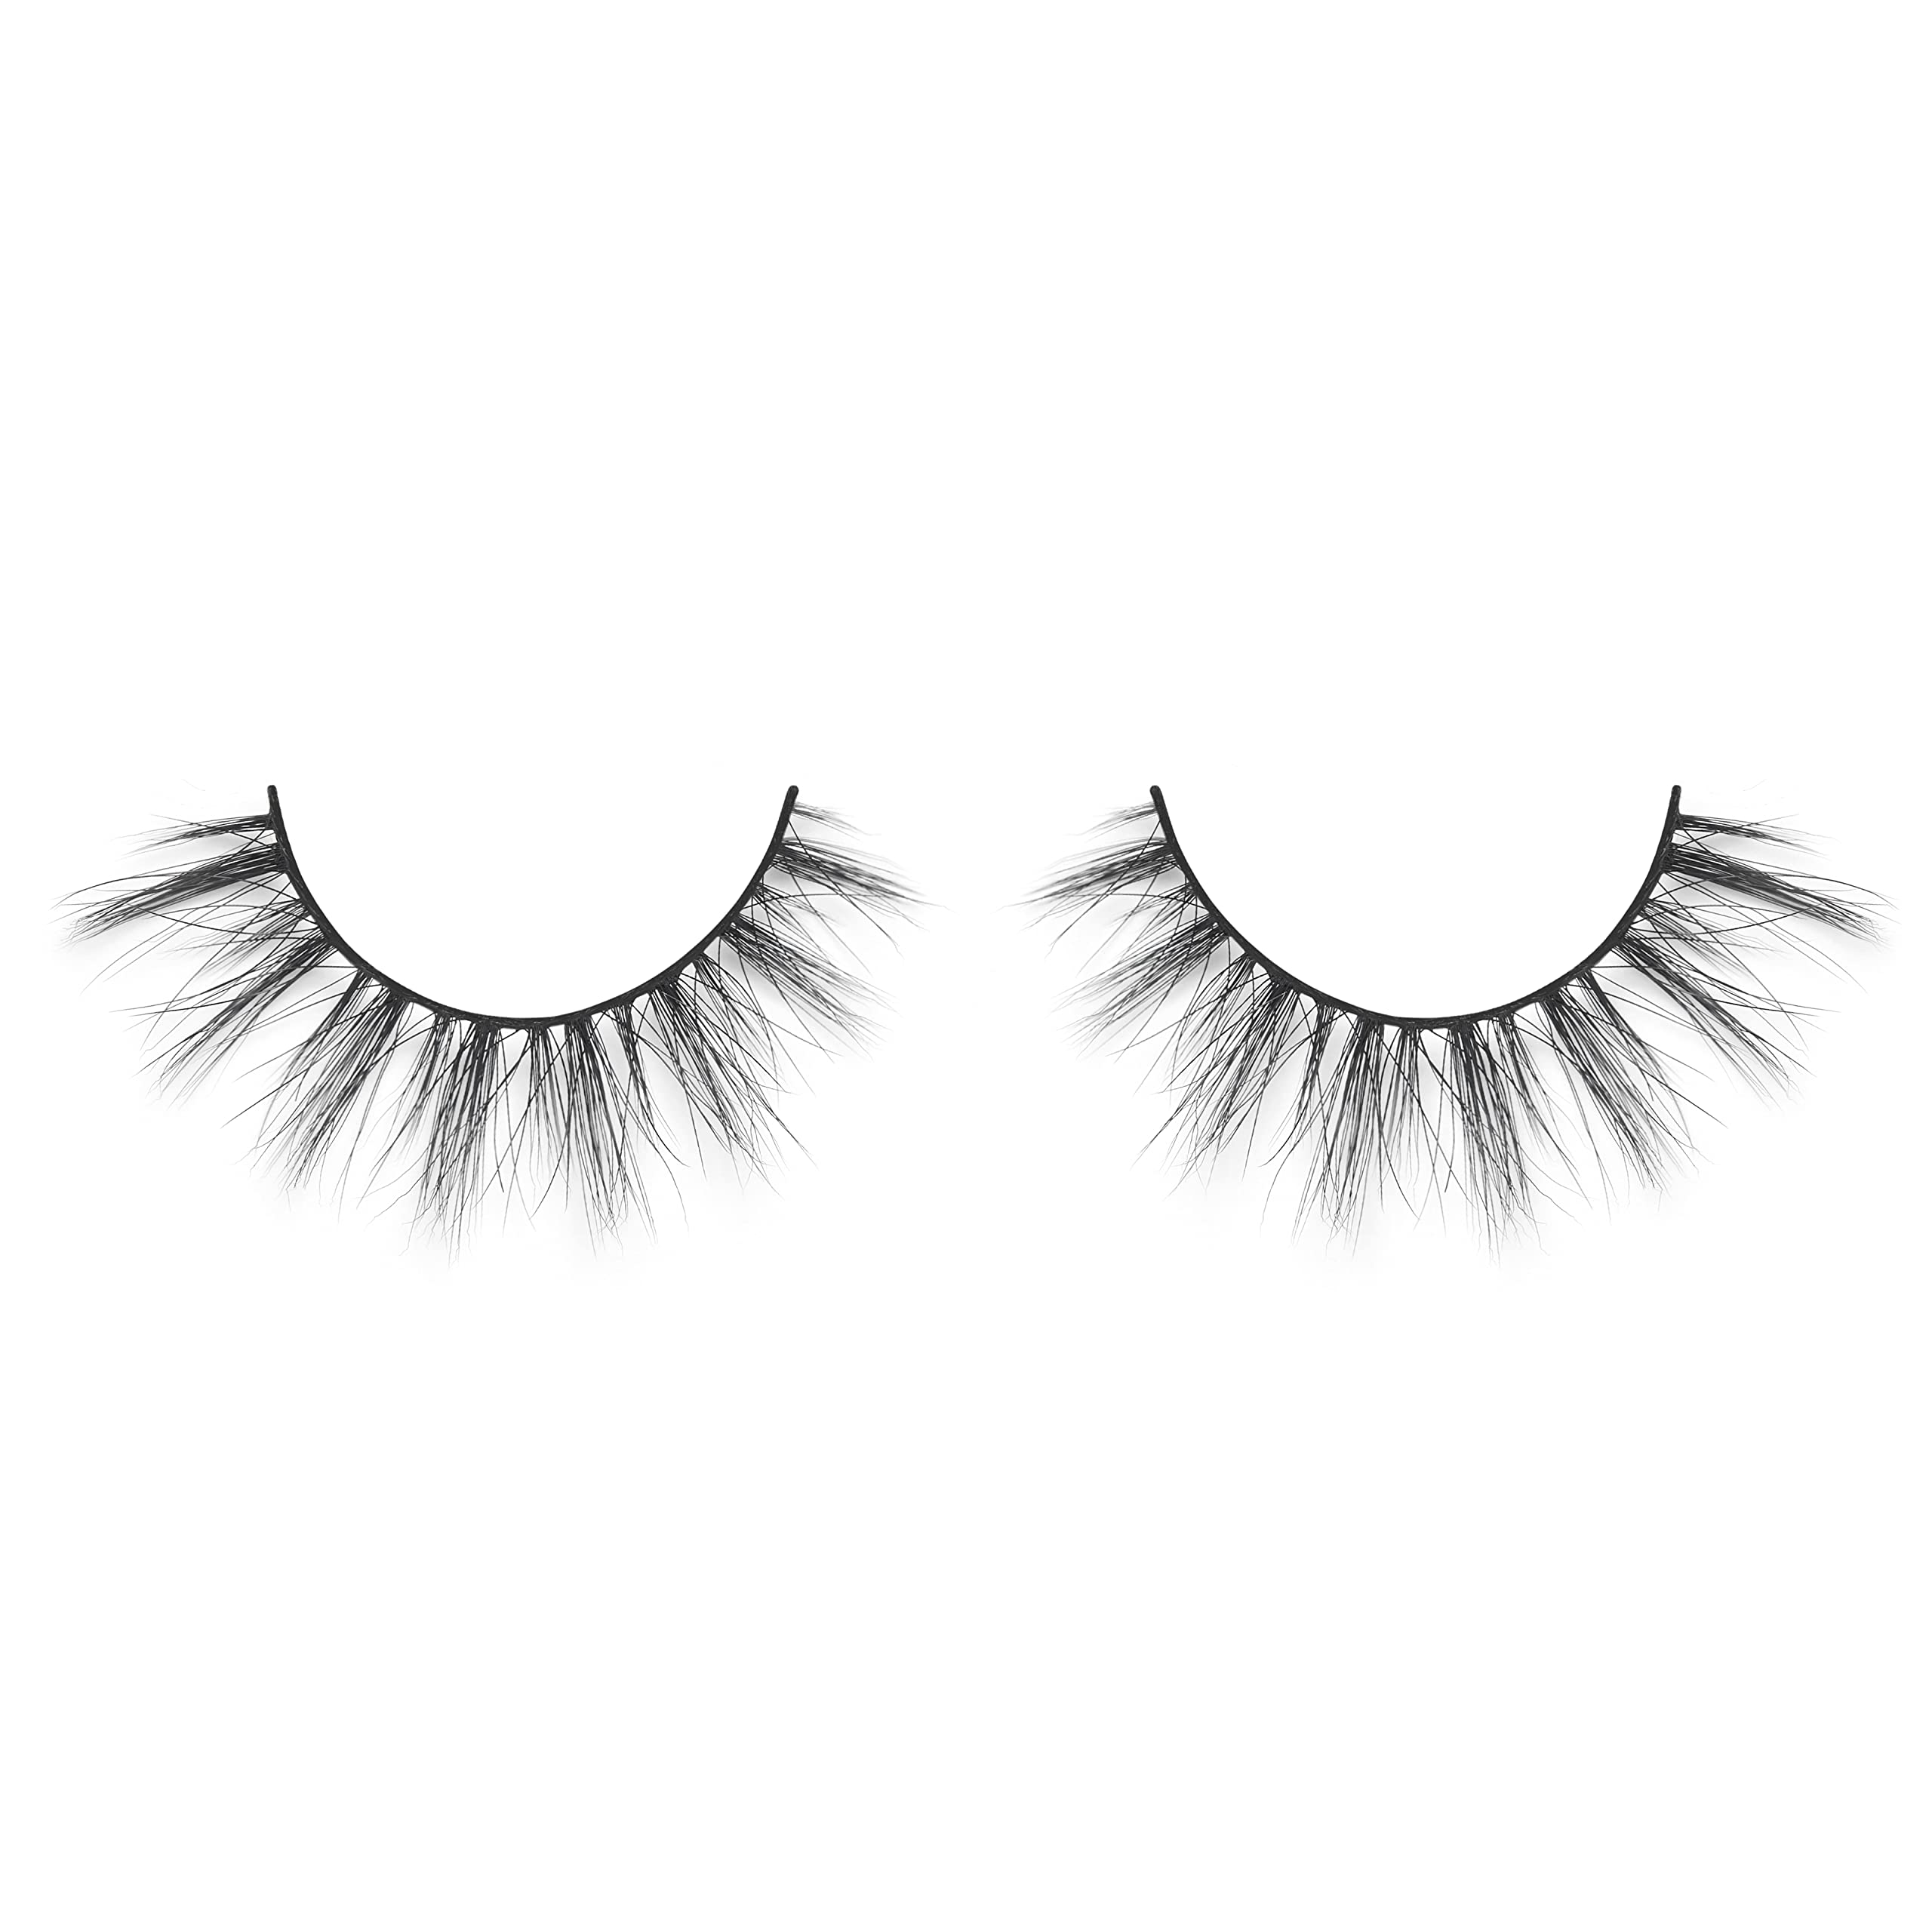 Lilly Lashes Everyday Stripped Down Faux Mink Lashes False Eyelashes Natural Look Faux Wispy Lashes Mink Fake Eyelashes To Be Worn With Eye Glasses Natural Lashes 13 mm Reusable Up to 20 Times